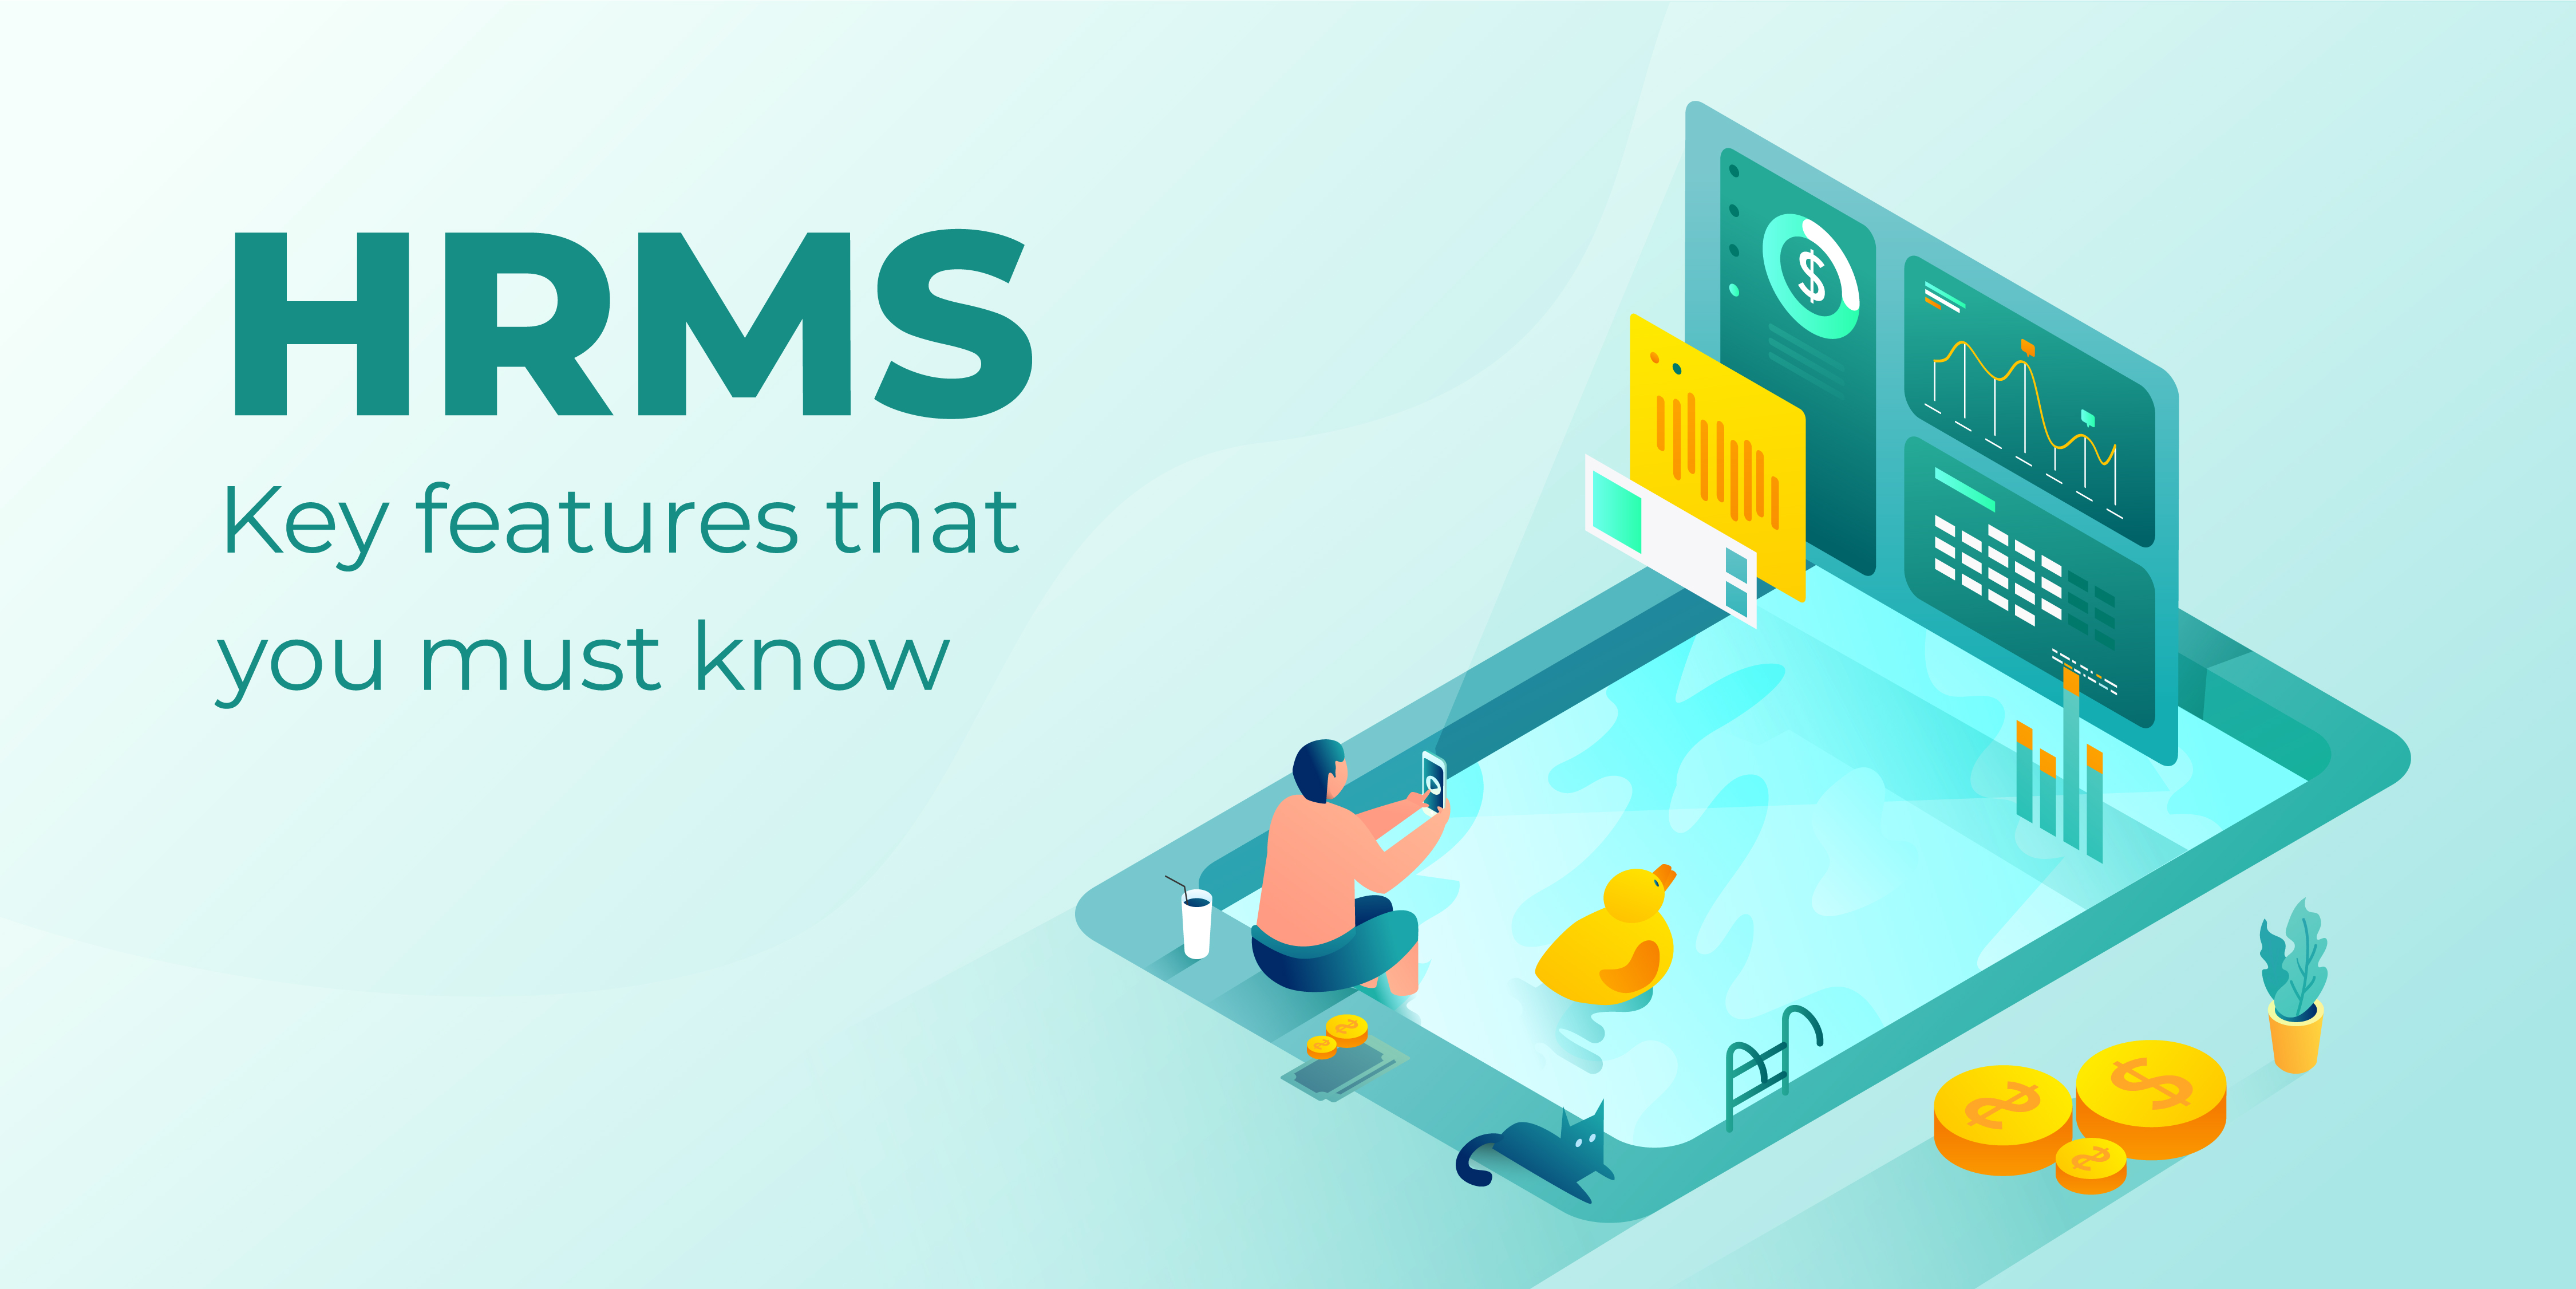 HRMS - Key features that you must know.